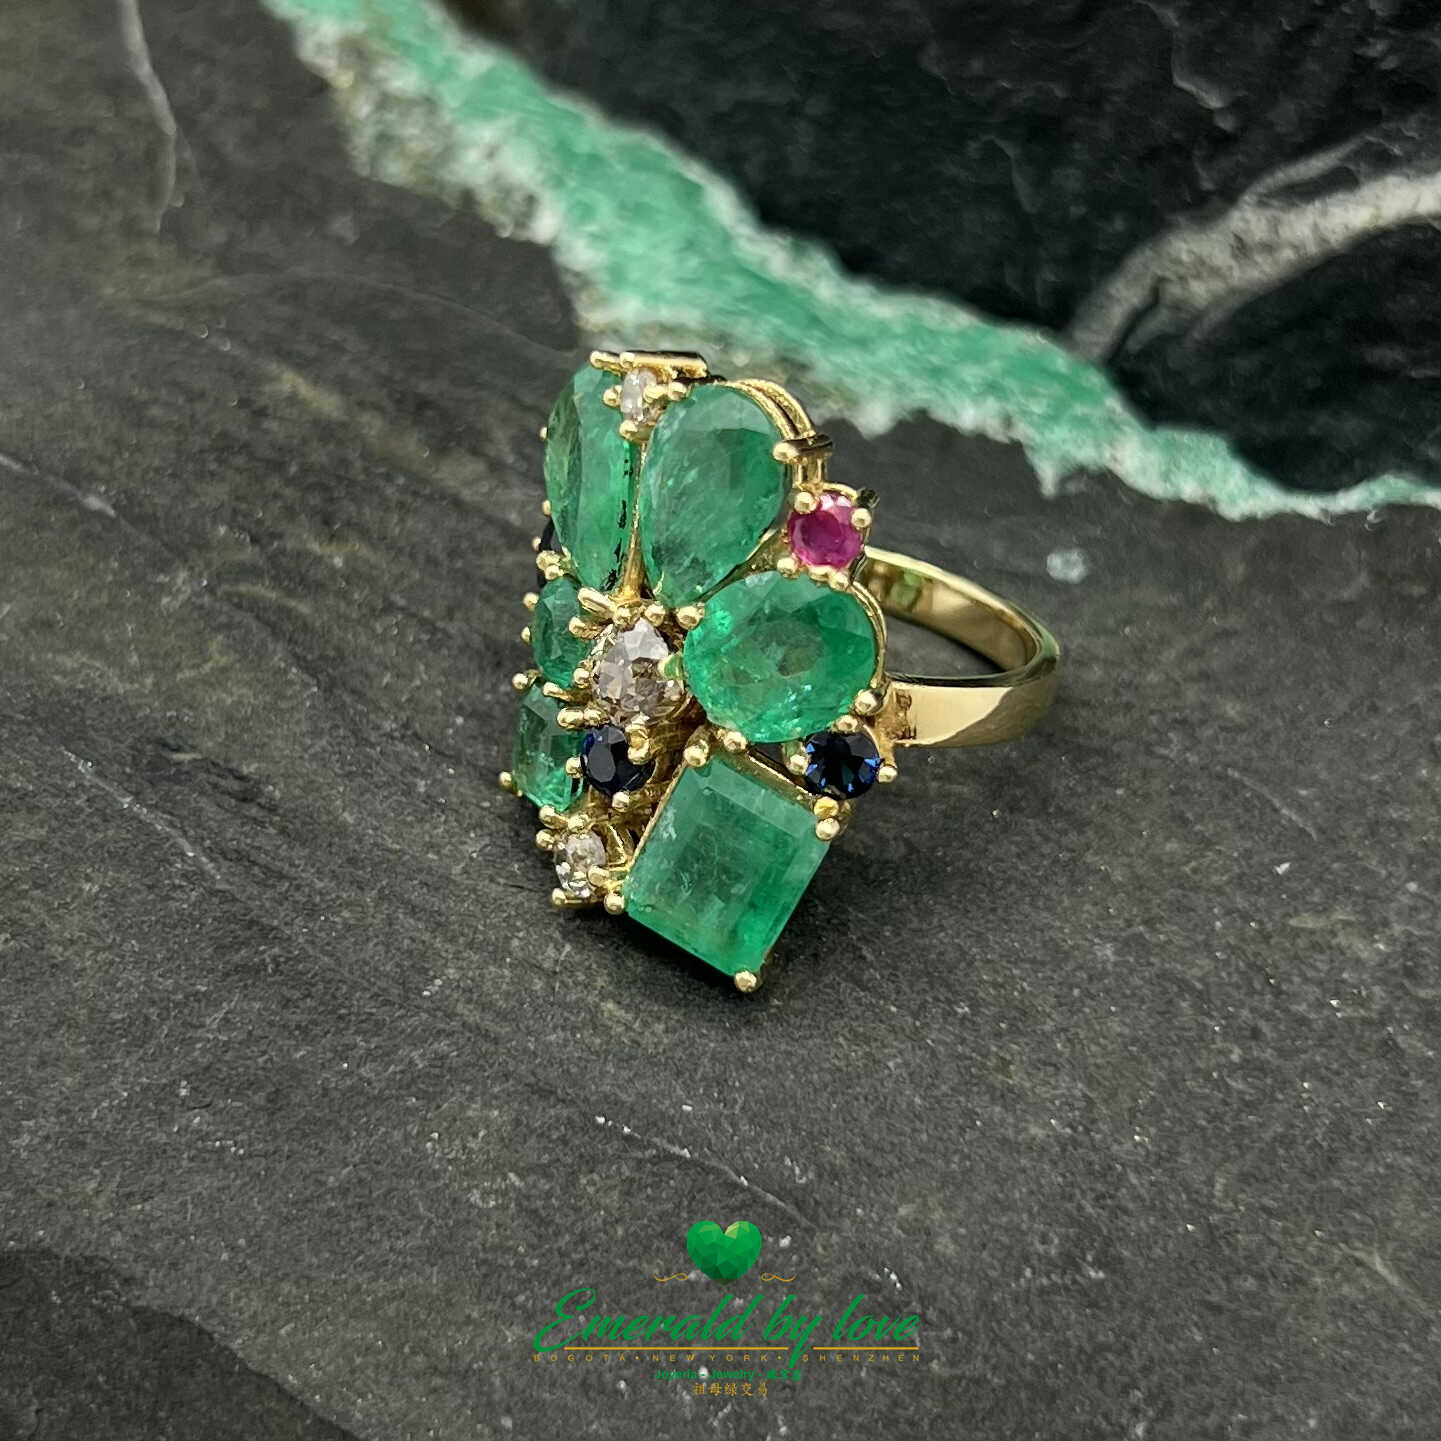 Yellow Gold Ring Adorned with Crystal Emeralds, Diamonds, Sapphires, and Rubies